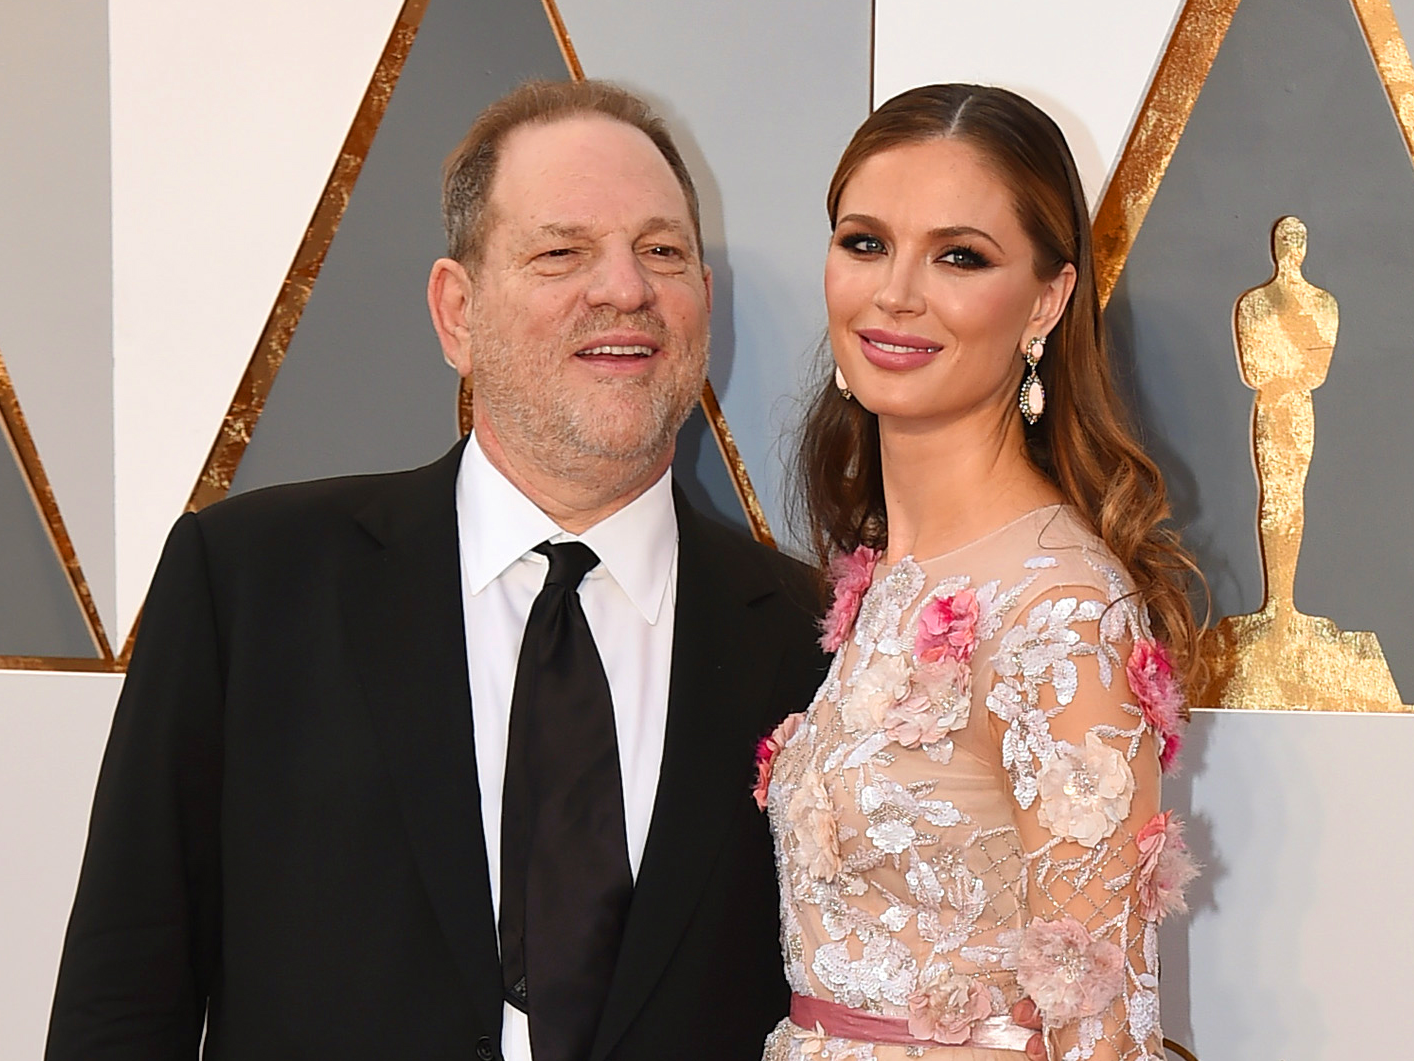 Georgina Chapman has Moved on From her Divorce with Harvey Weinstein 2